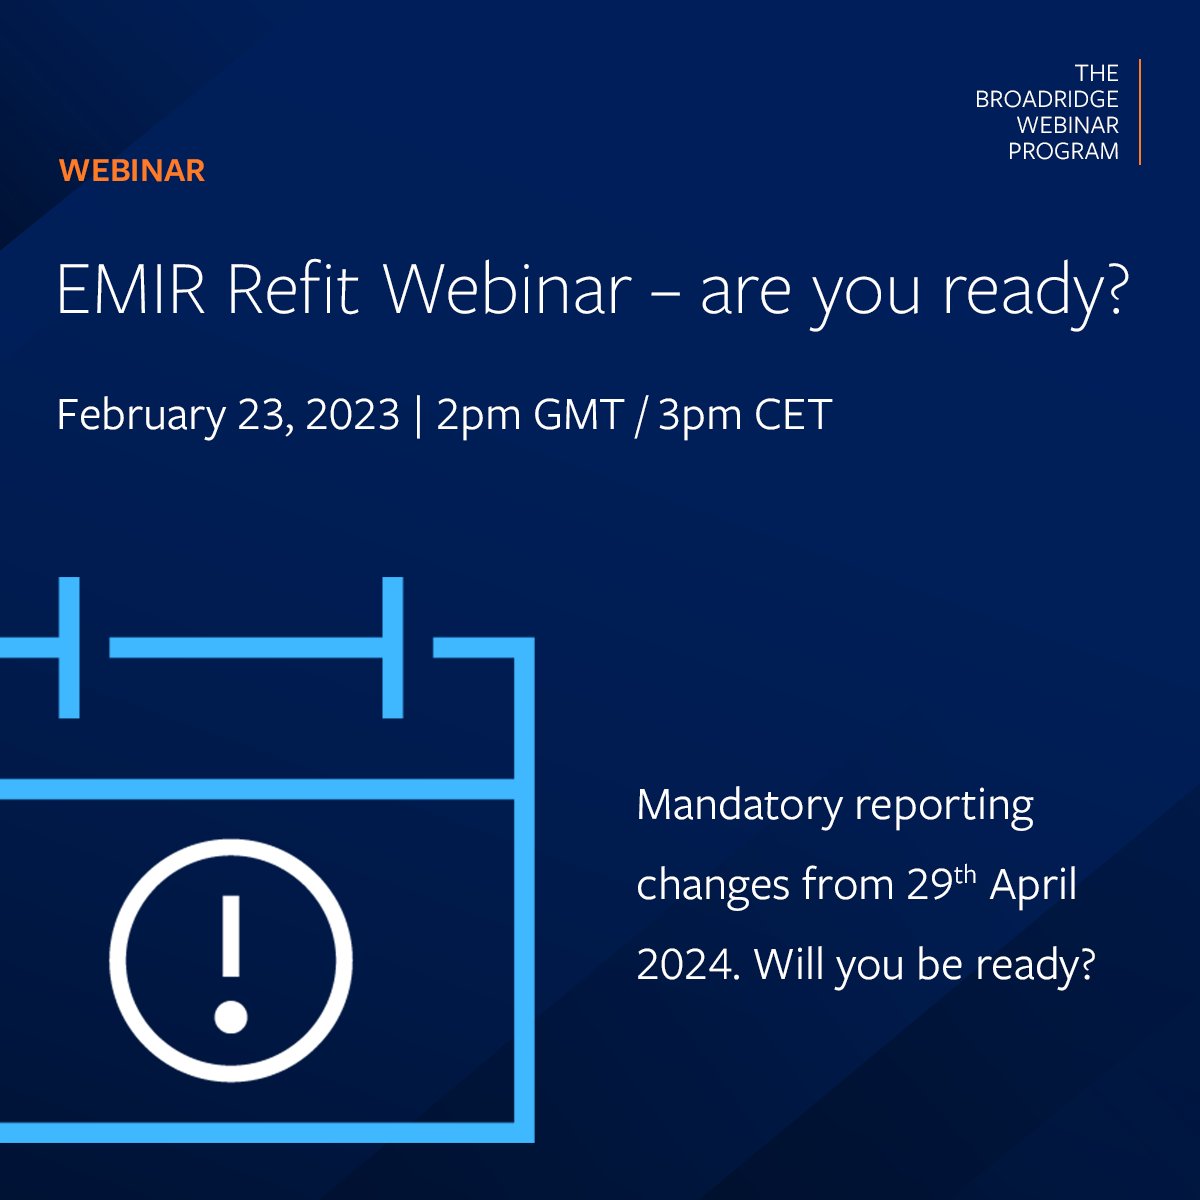 EMIR Refit goes live on 29th April 2024 and requires a significant change to the reportable fields and other important changes. Register for this webinar now to learn how you can future-proof your reporting set-up.

#EMIRRefit   bit.ly/40MPkbK